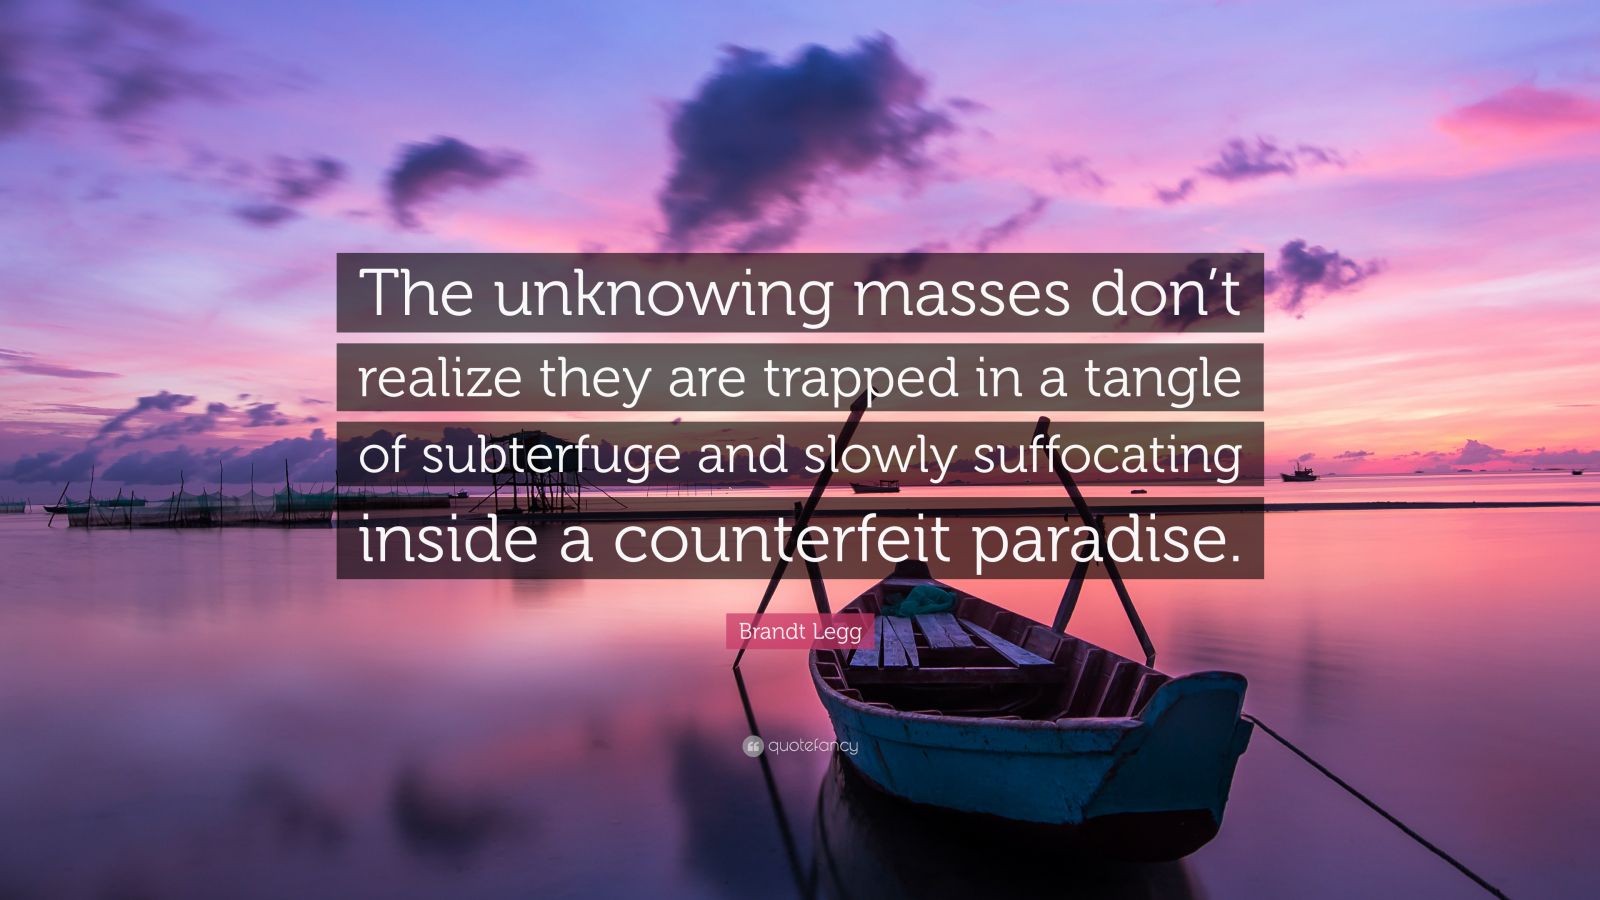 Brandt Legg Quote: “The unknowing masses don't realize they are trapped in  a tangle of subterfuge and slowly suffocating inside a counterfei...”